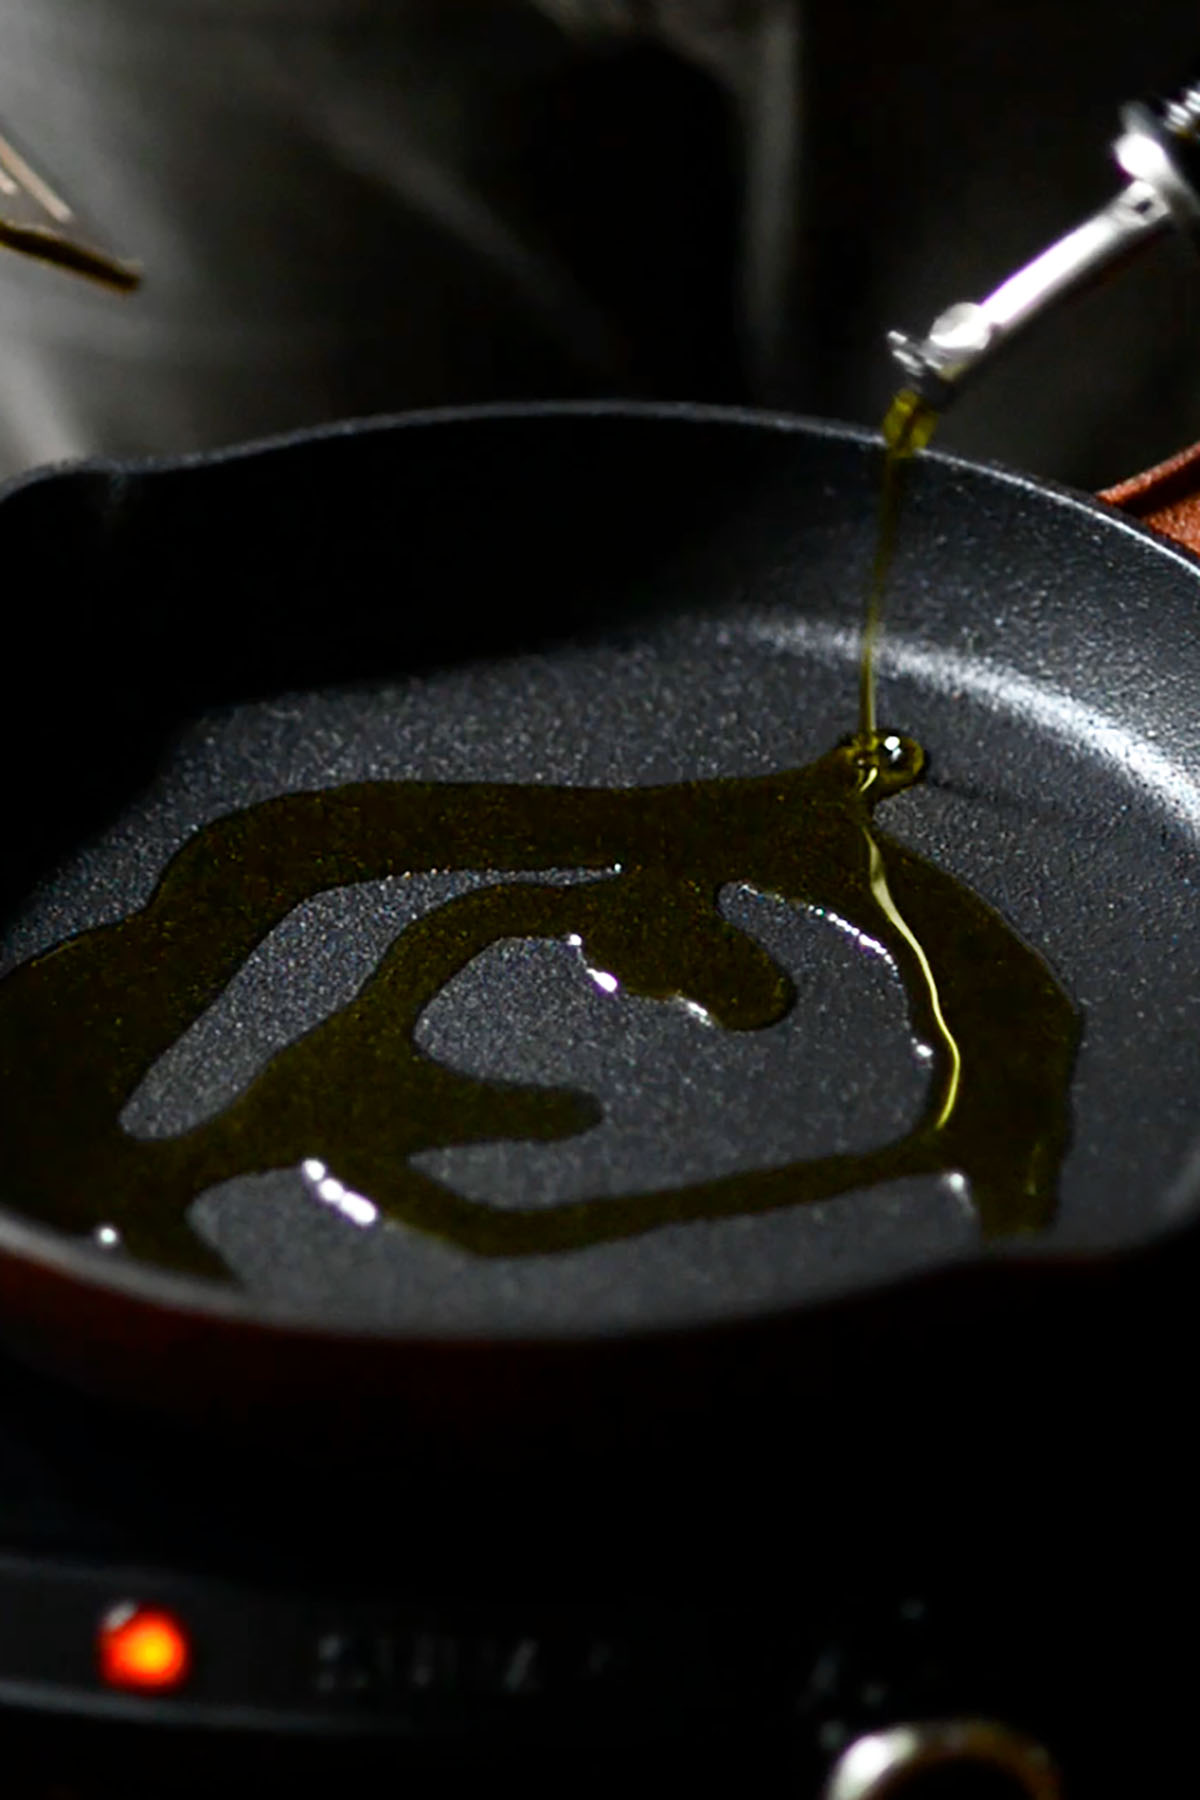 Olive oil in a cast iron skillet over a heating element.